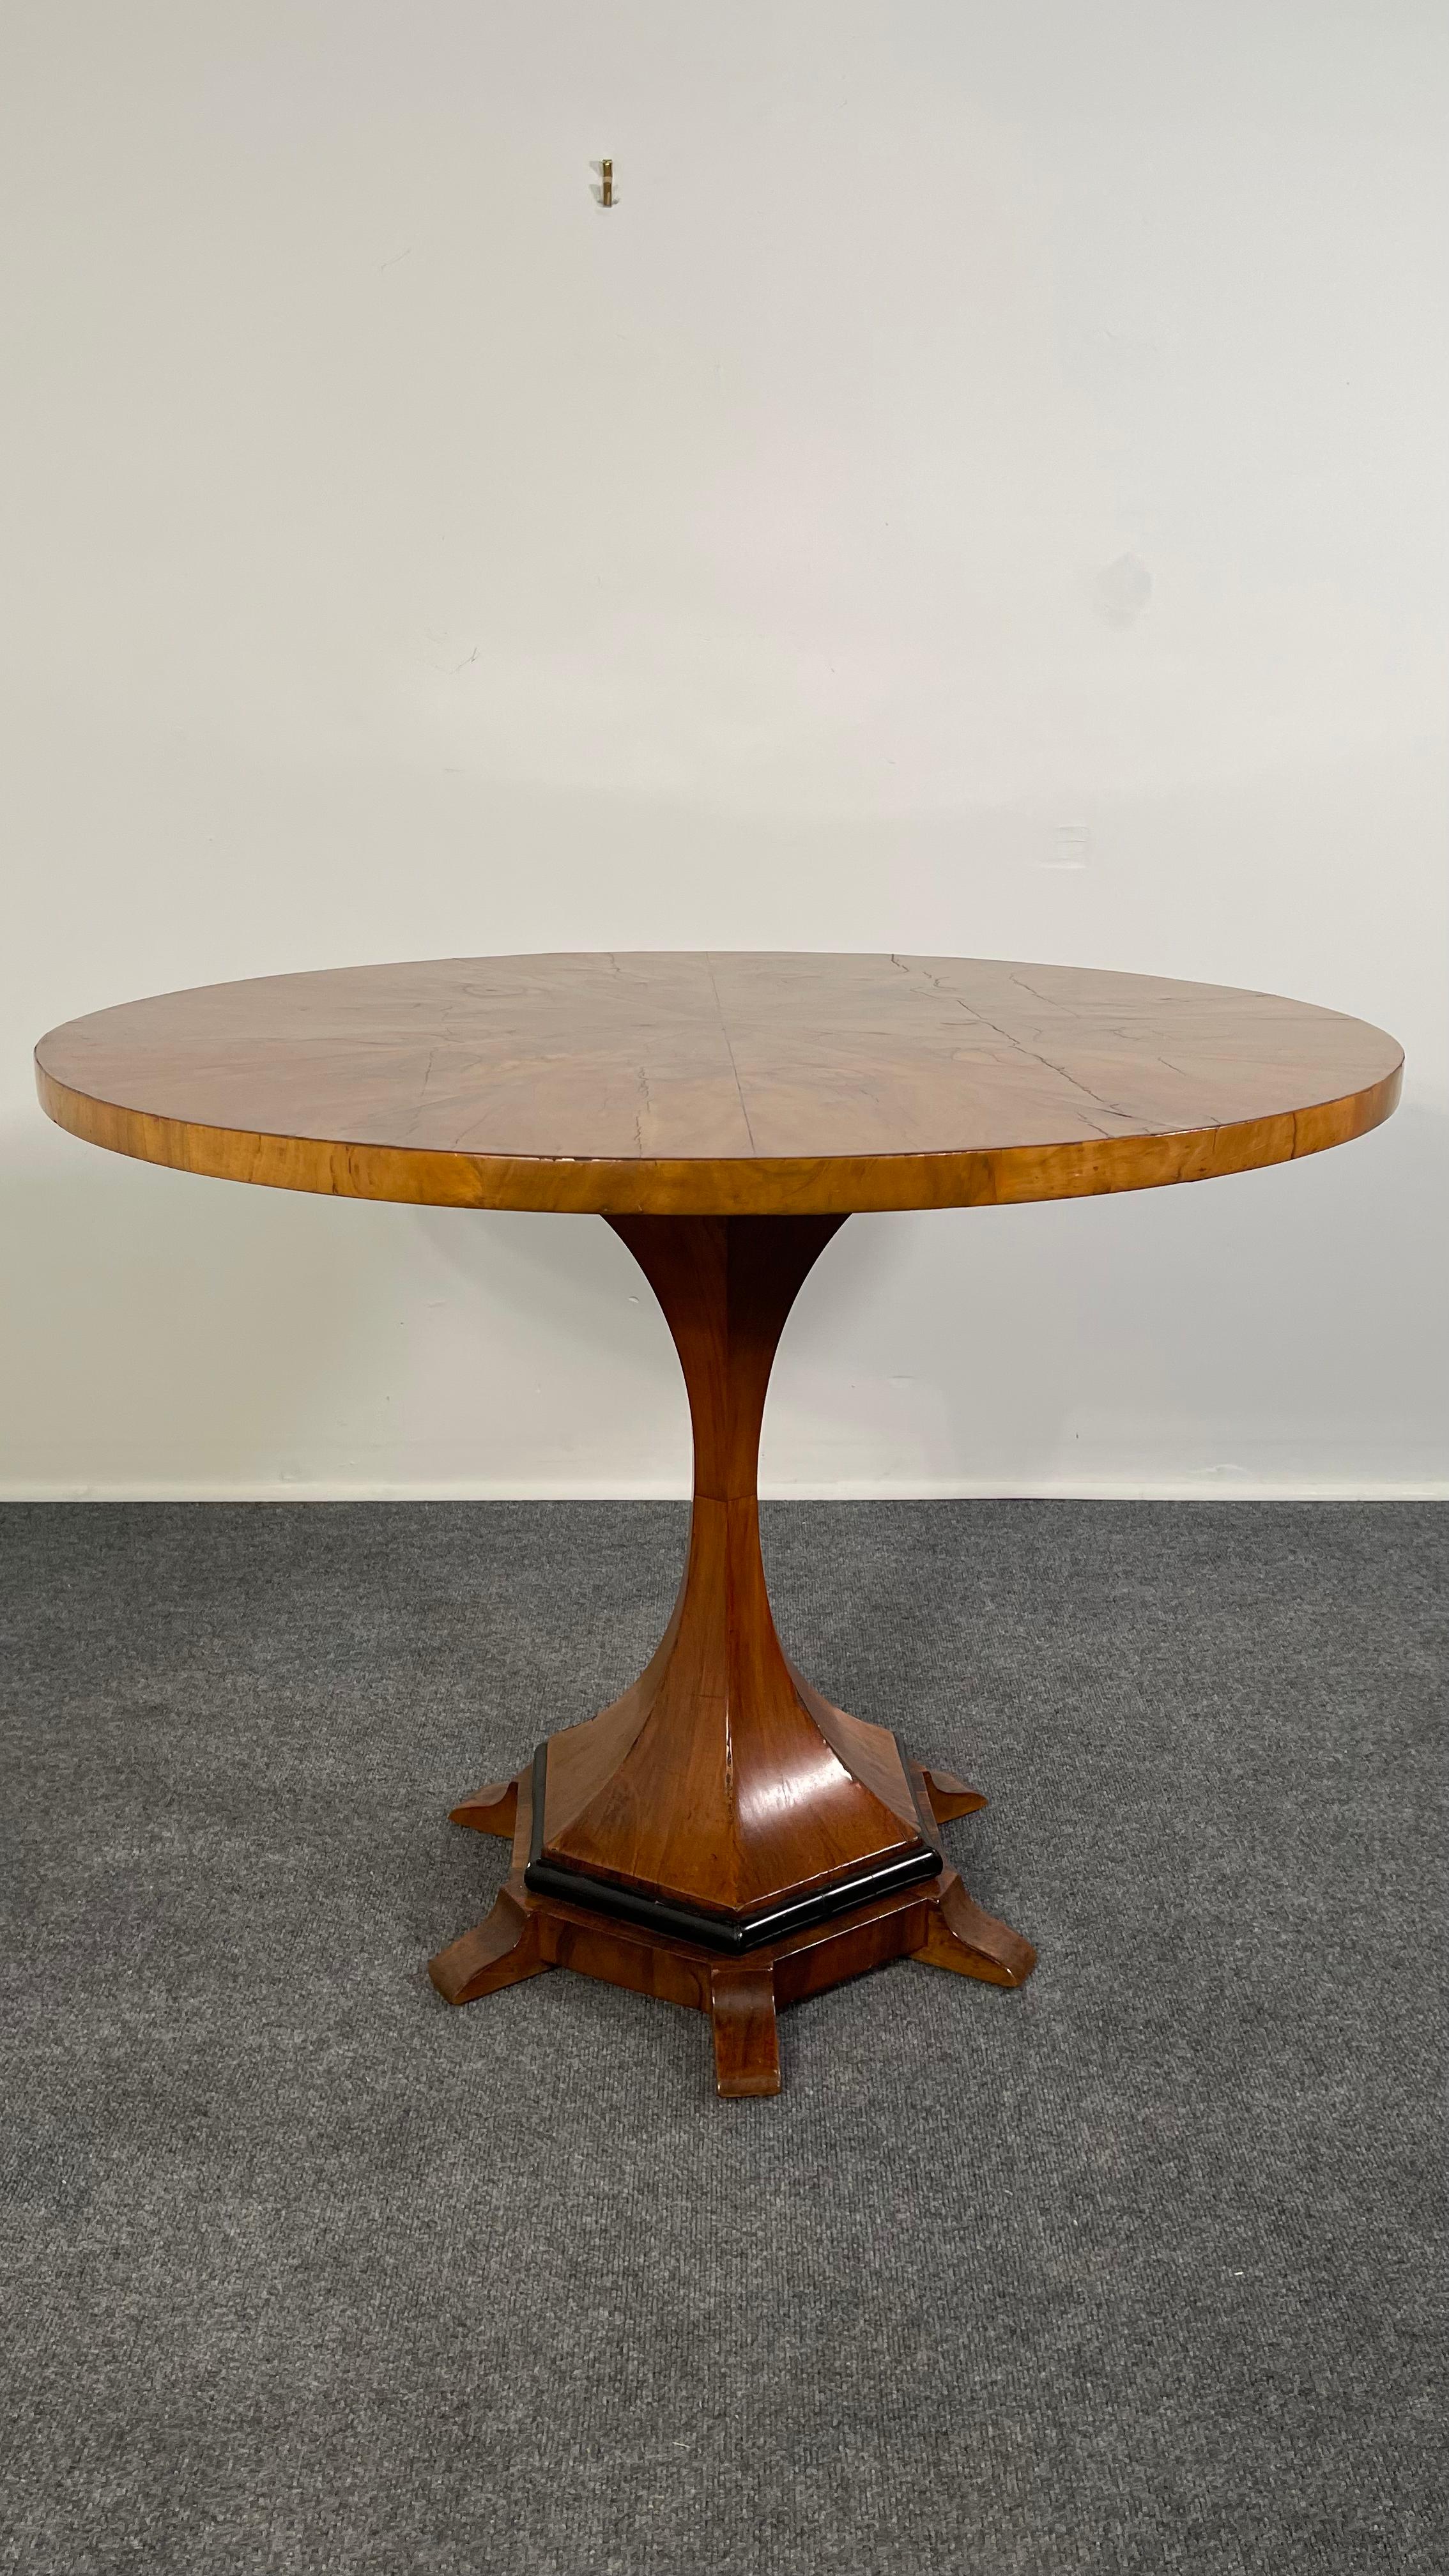 The circular top with highly figured veneer over a columnar support, terminating in a hexagonal base with 6 feet.